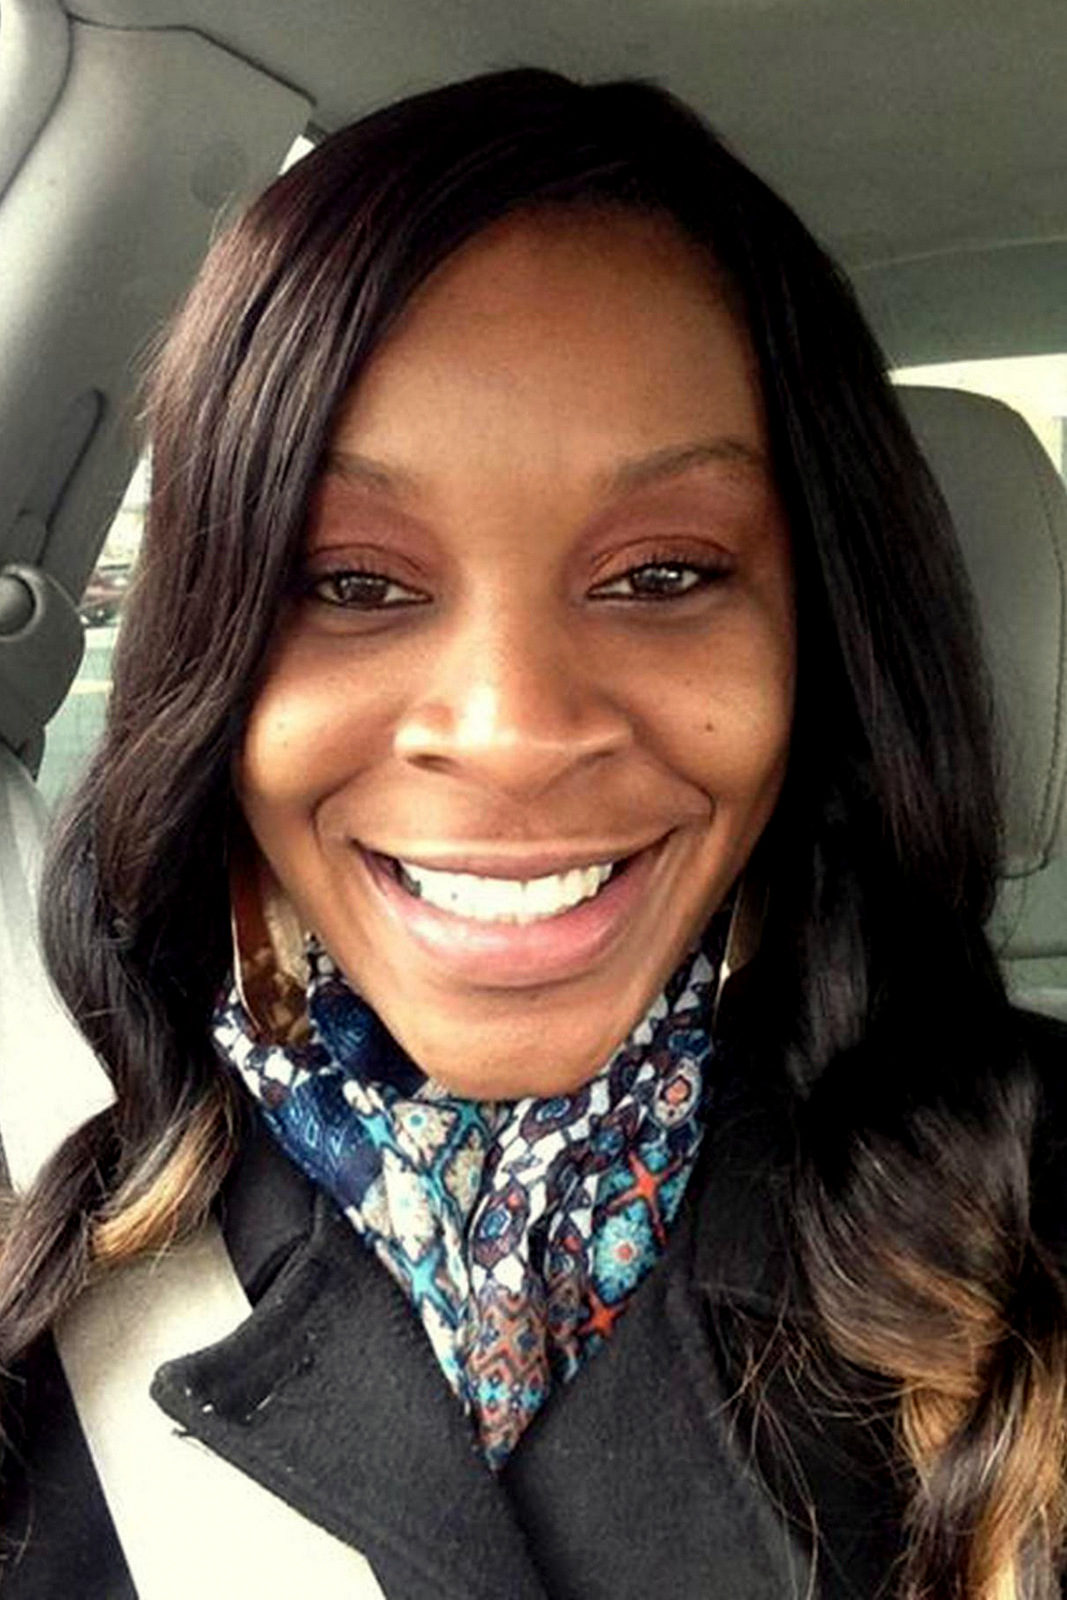 Proposed Sandra Bland Act Would Change Processes For Police, Jails